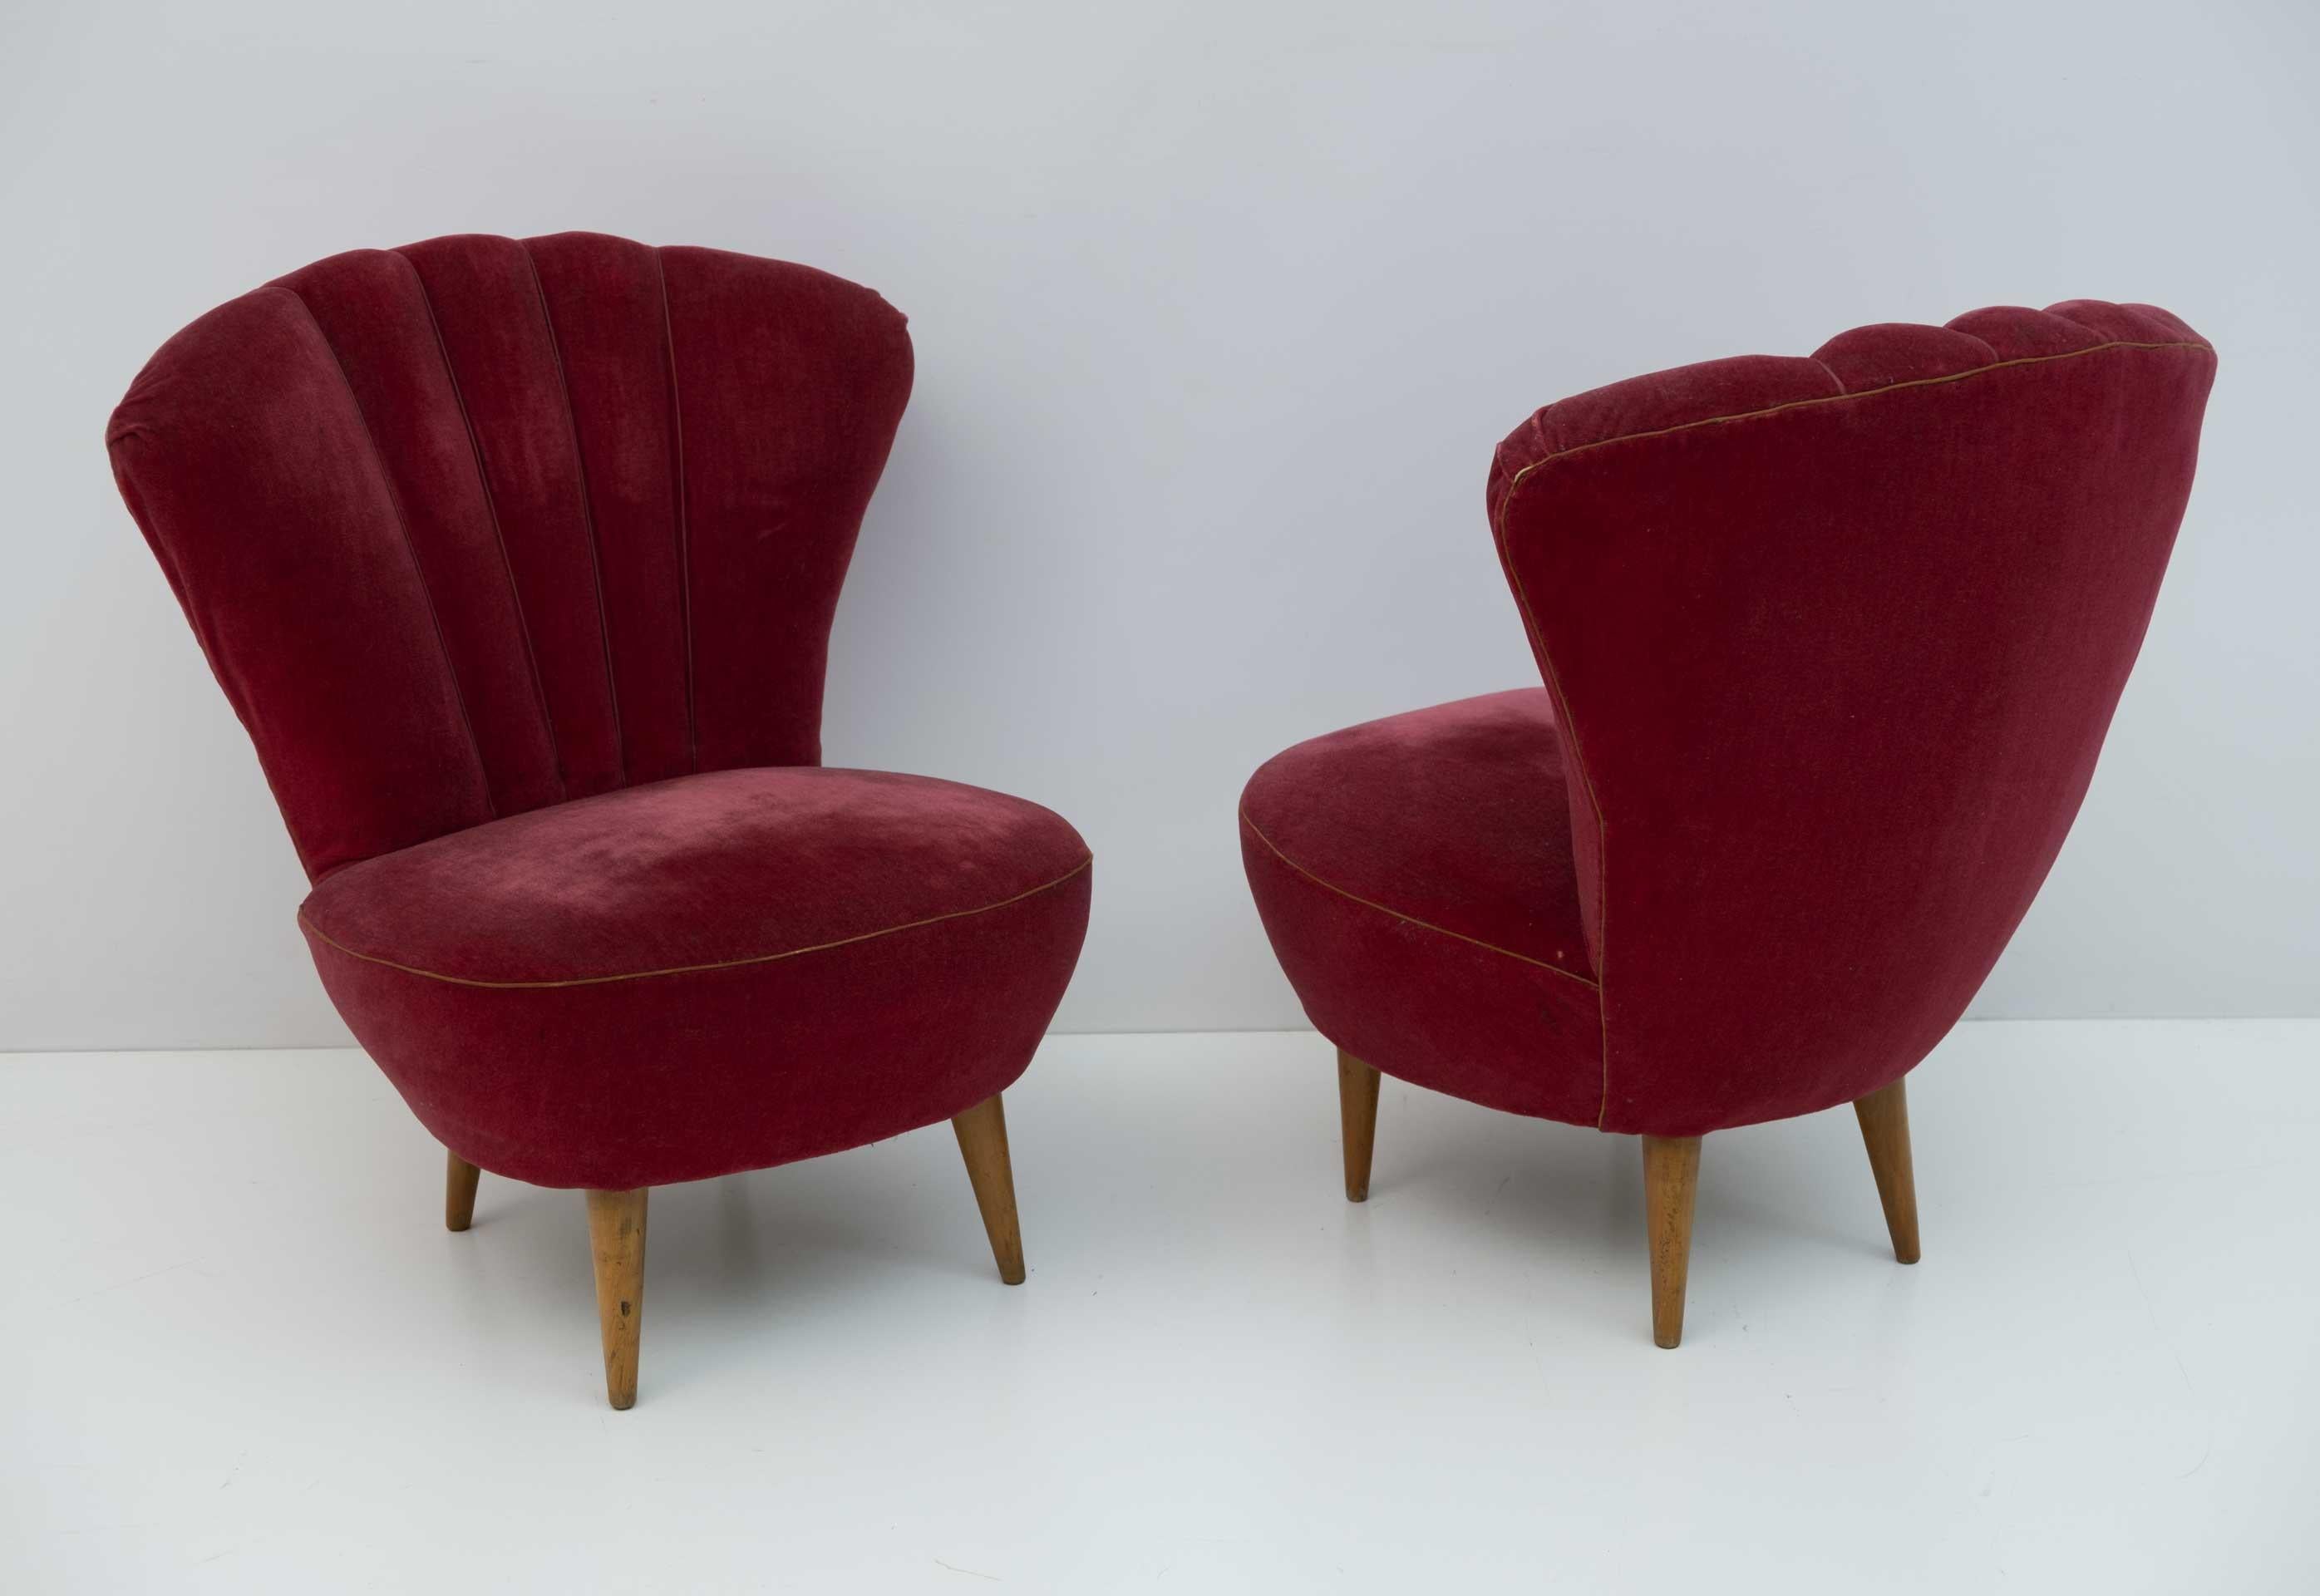 Pair of daisy model armchairs with wide and comfortable backrest, conical beech foot, good condition of the upholstery.
The velvet is original from the time but a new upholstery is recommended.
Designed by Gio Ponti and produced by ISA-BERGAMO